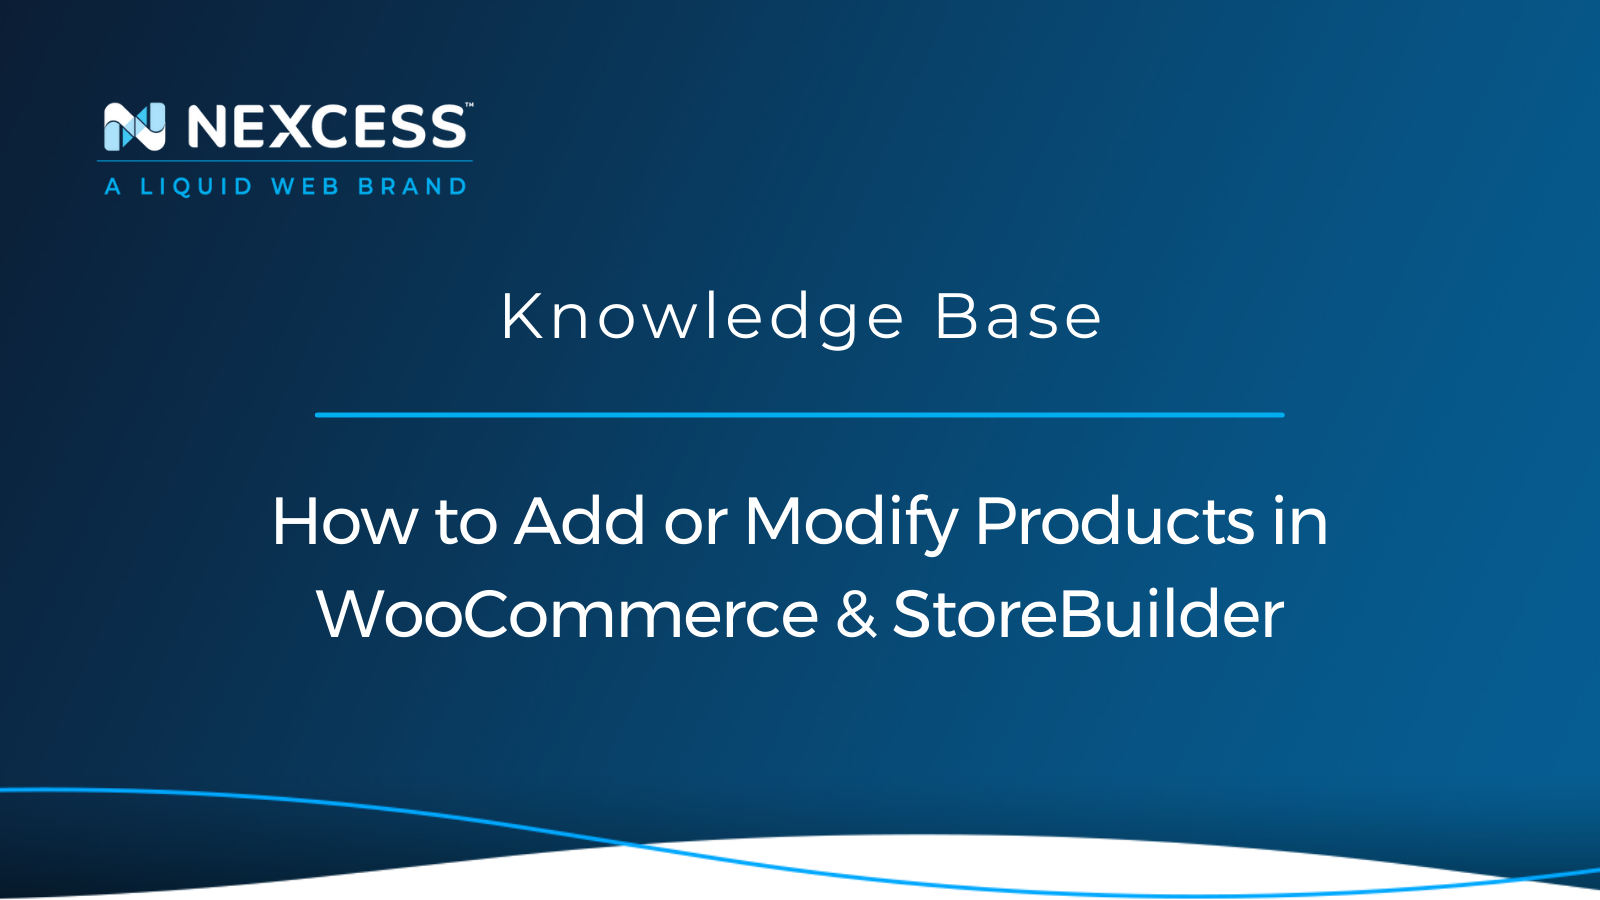 How to Add or Modify Products in WooCommerce & StoreBuilder